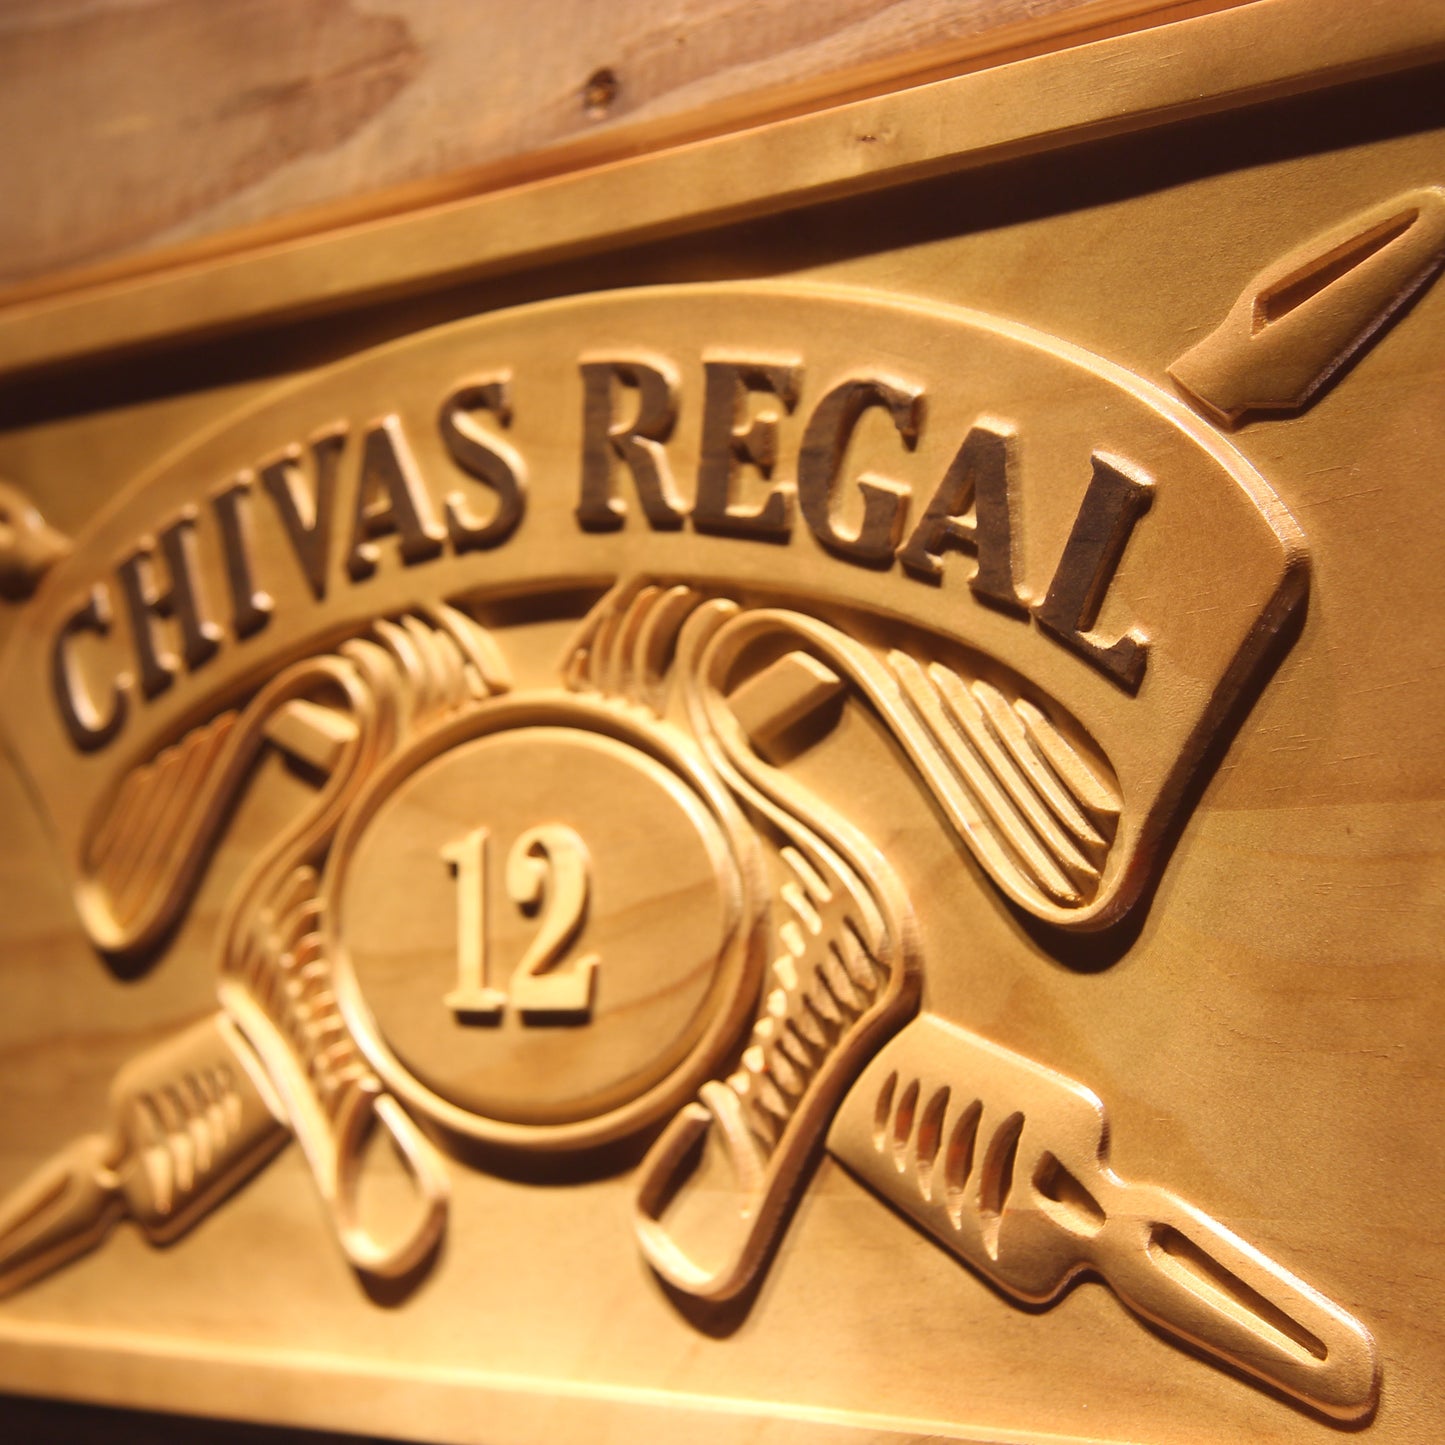 Chivas Regal 12 Whisky 3D Wooden Signs by Woody Signs Co. - Handmade Crafted Unique Wooden Creative